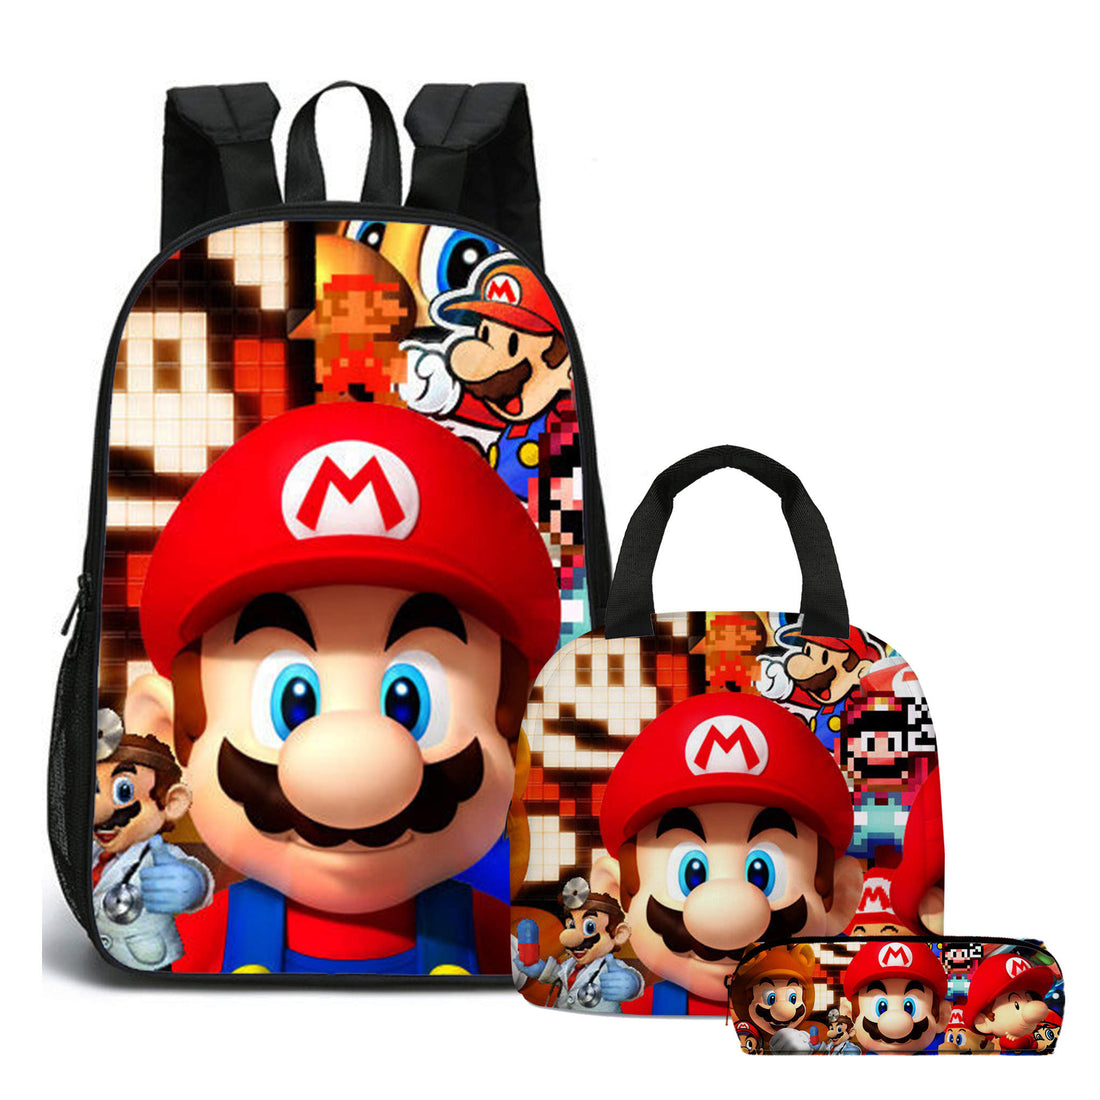 Double side print Marios Blocks Backpack set (3PC) (17 inch size)